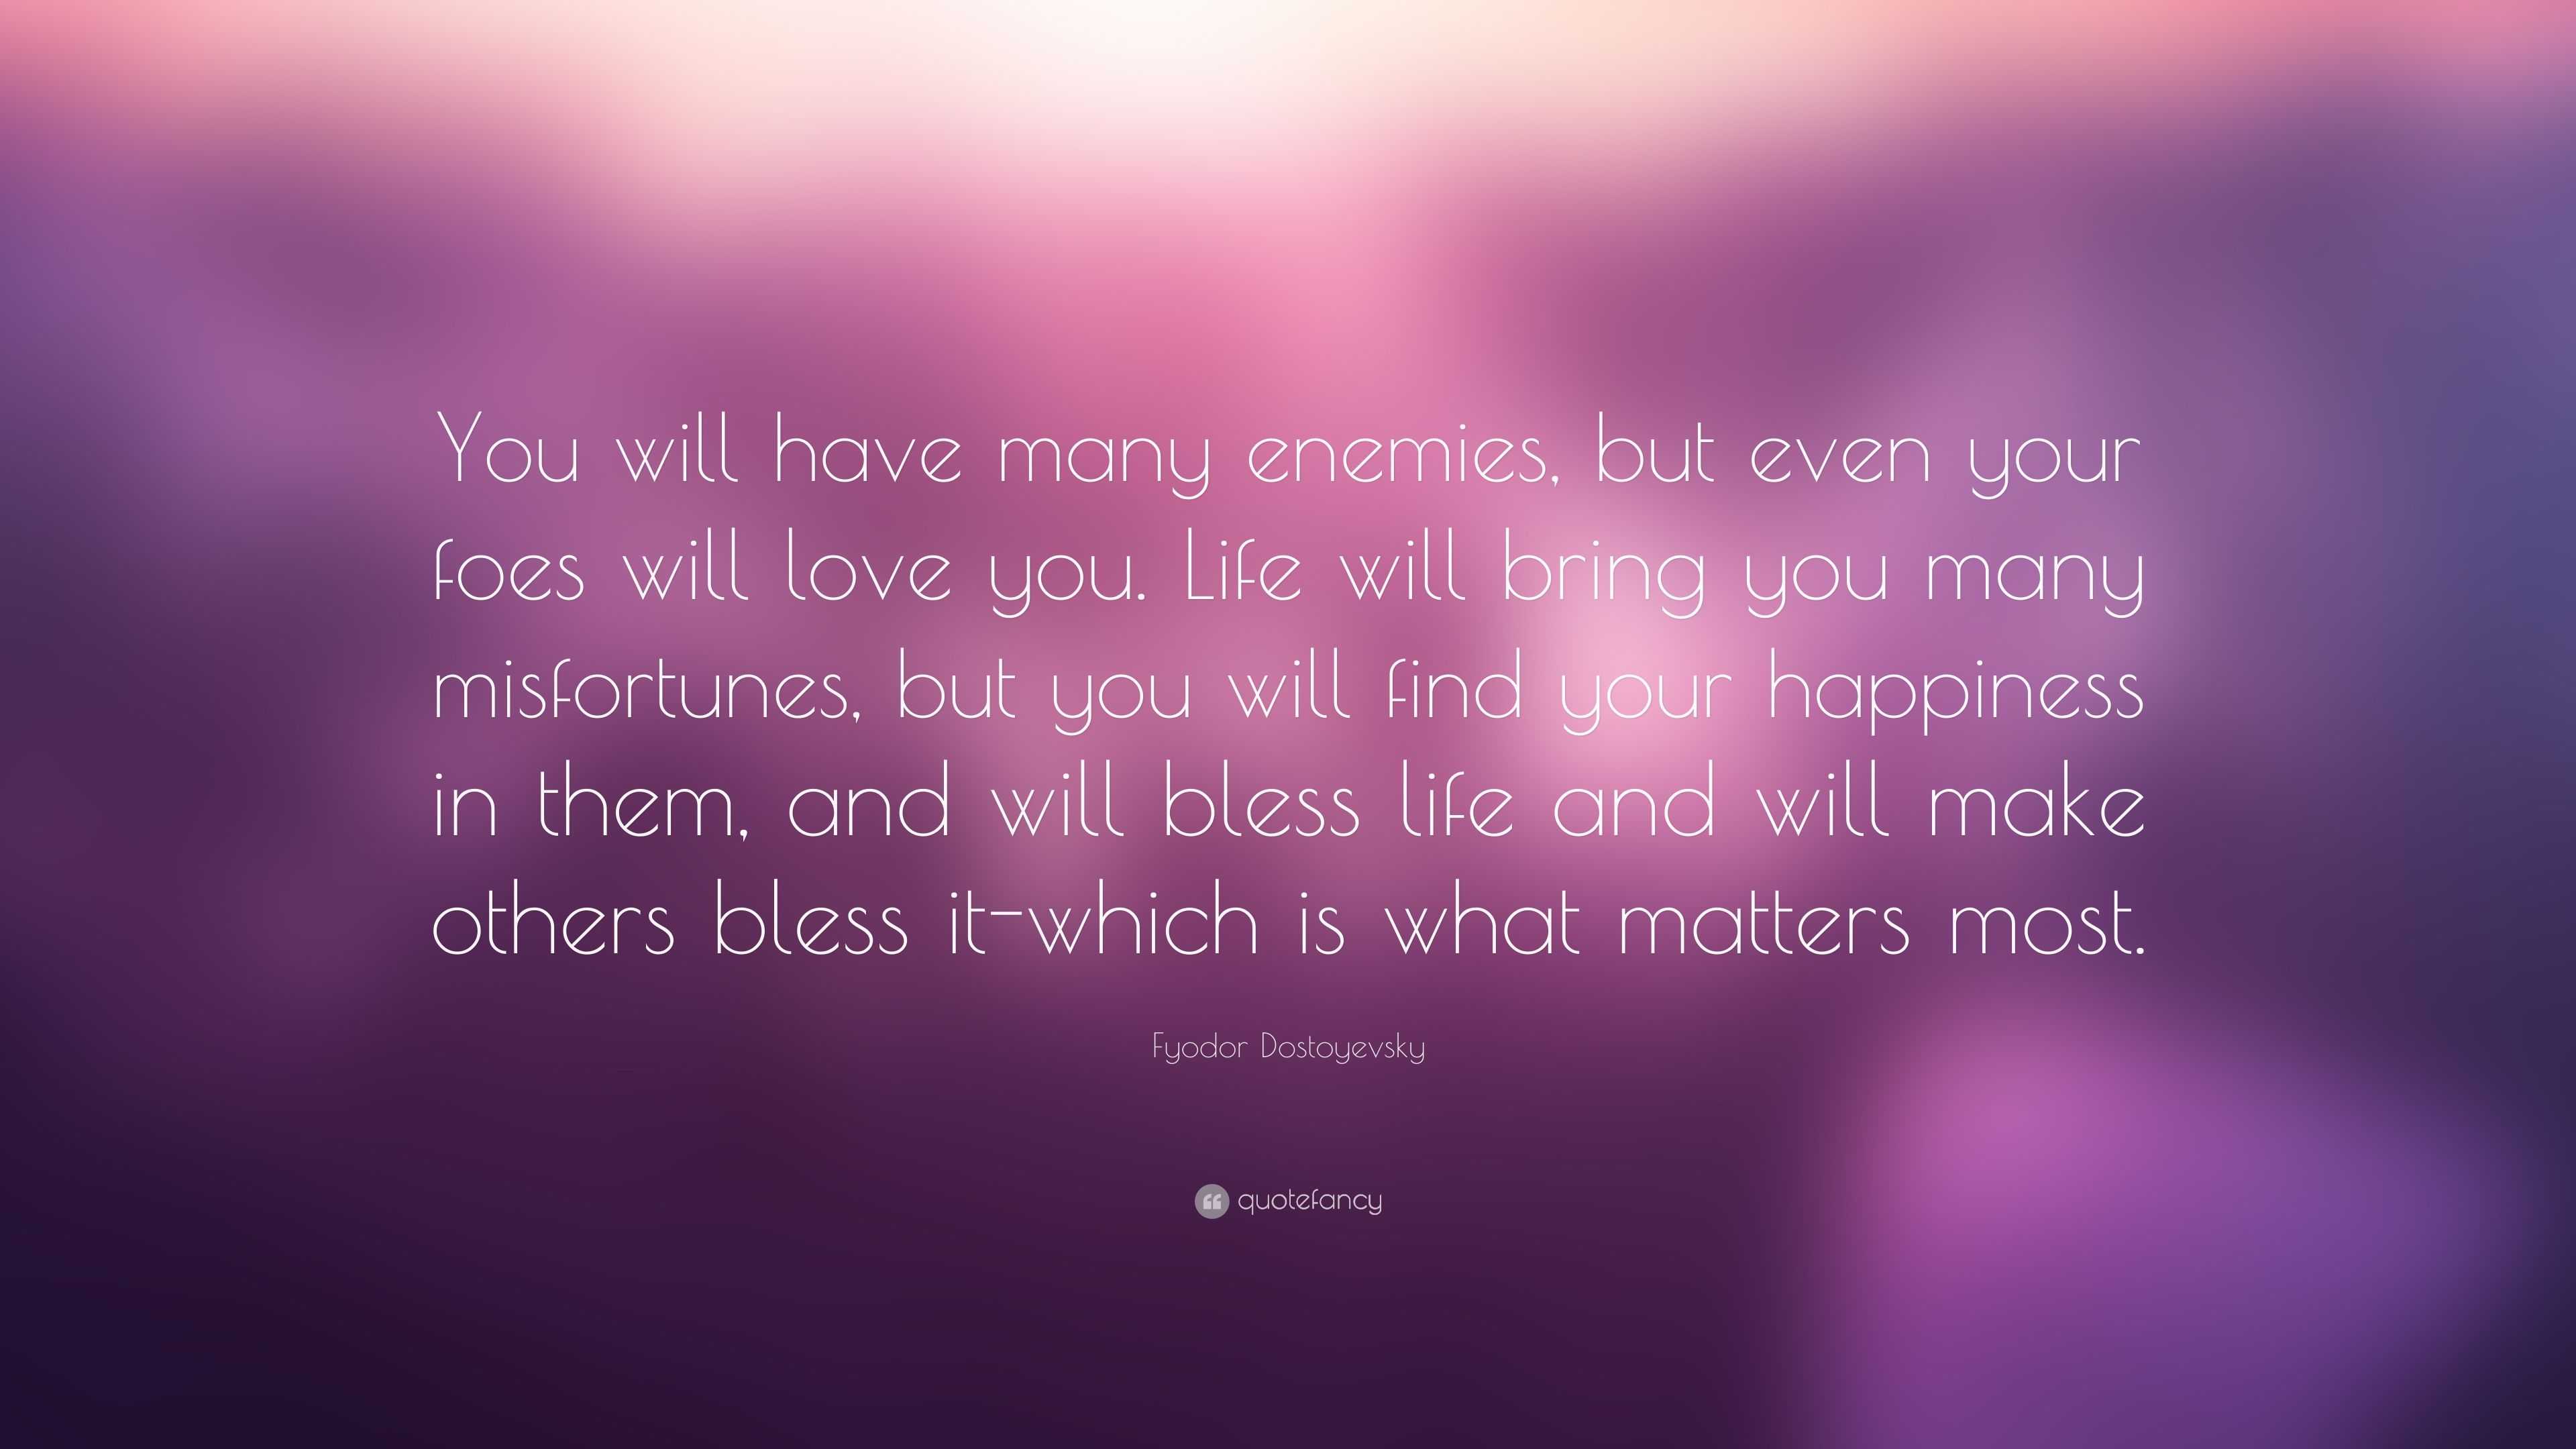 Fyodor Dostoyevsky Quote: “You will have many enemies, but even your ...